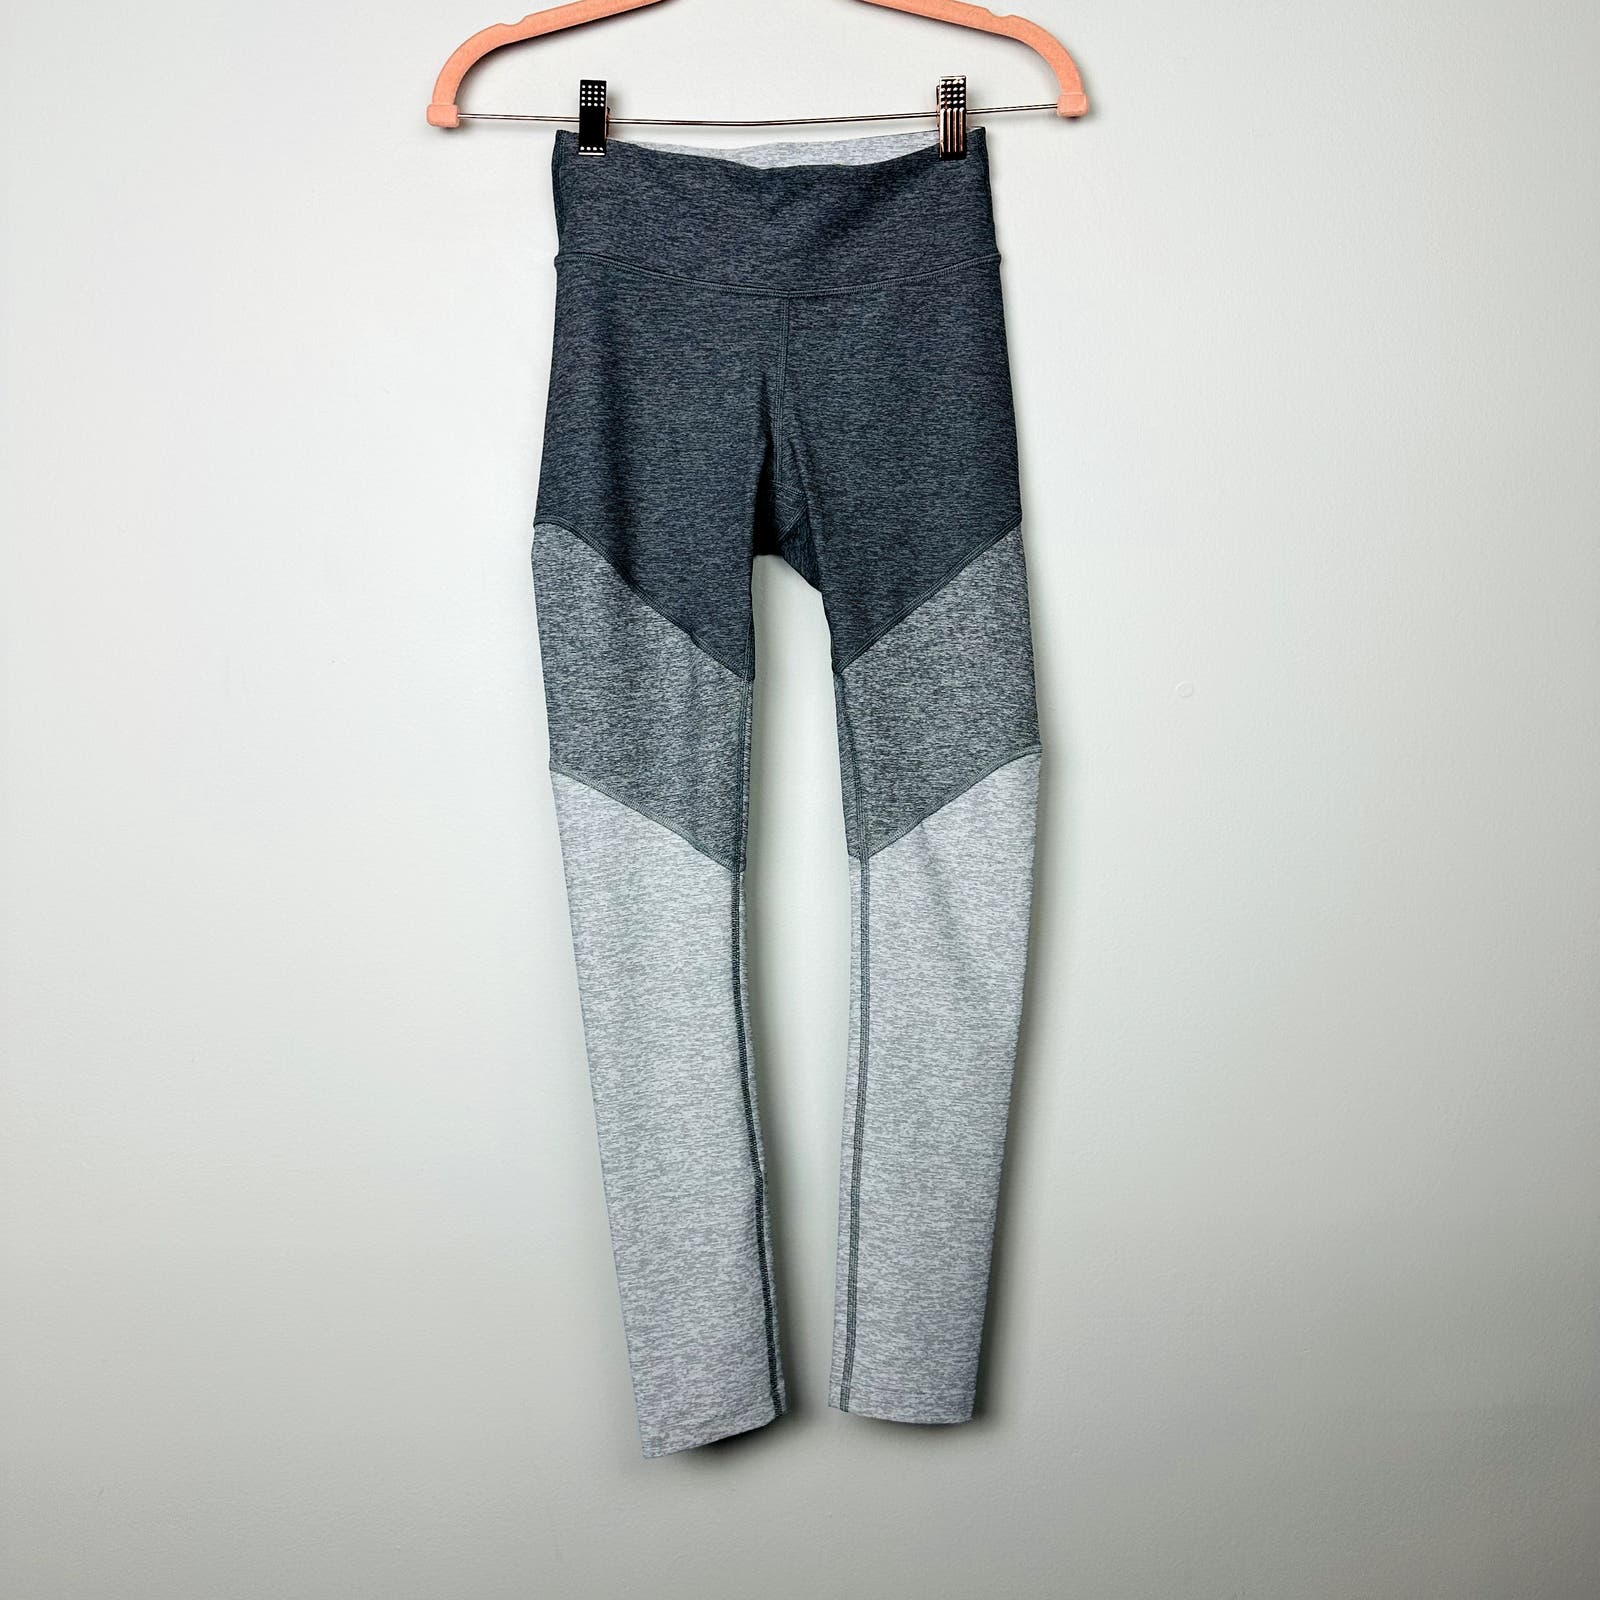 Outdoor Voices NWT Graphite Ash High Waist Springs 7/8 Leggings Size XS